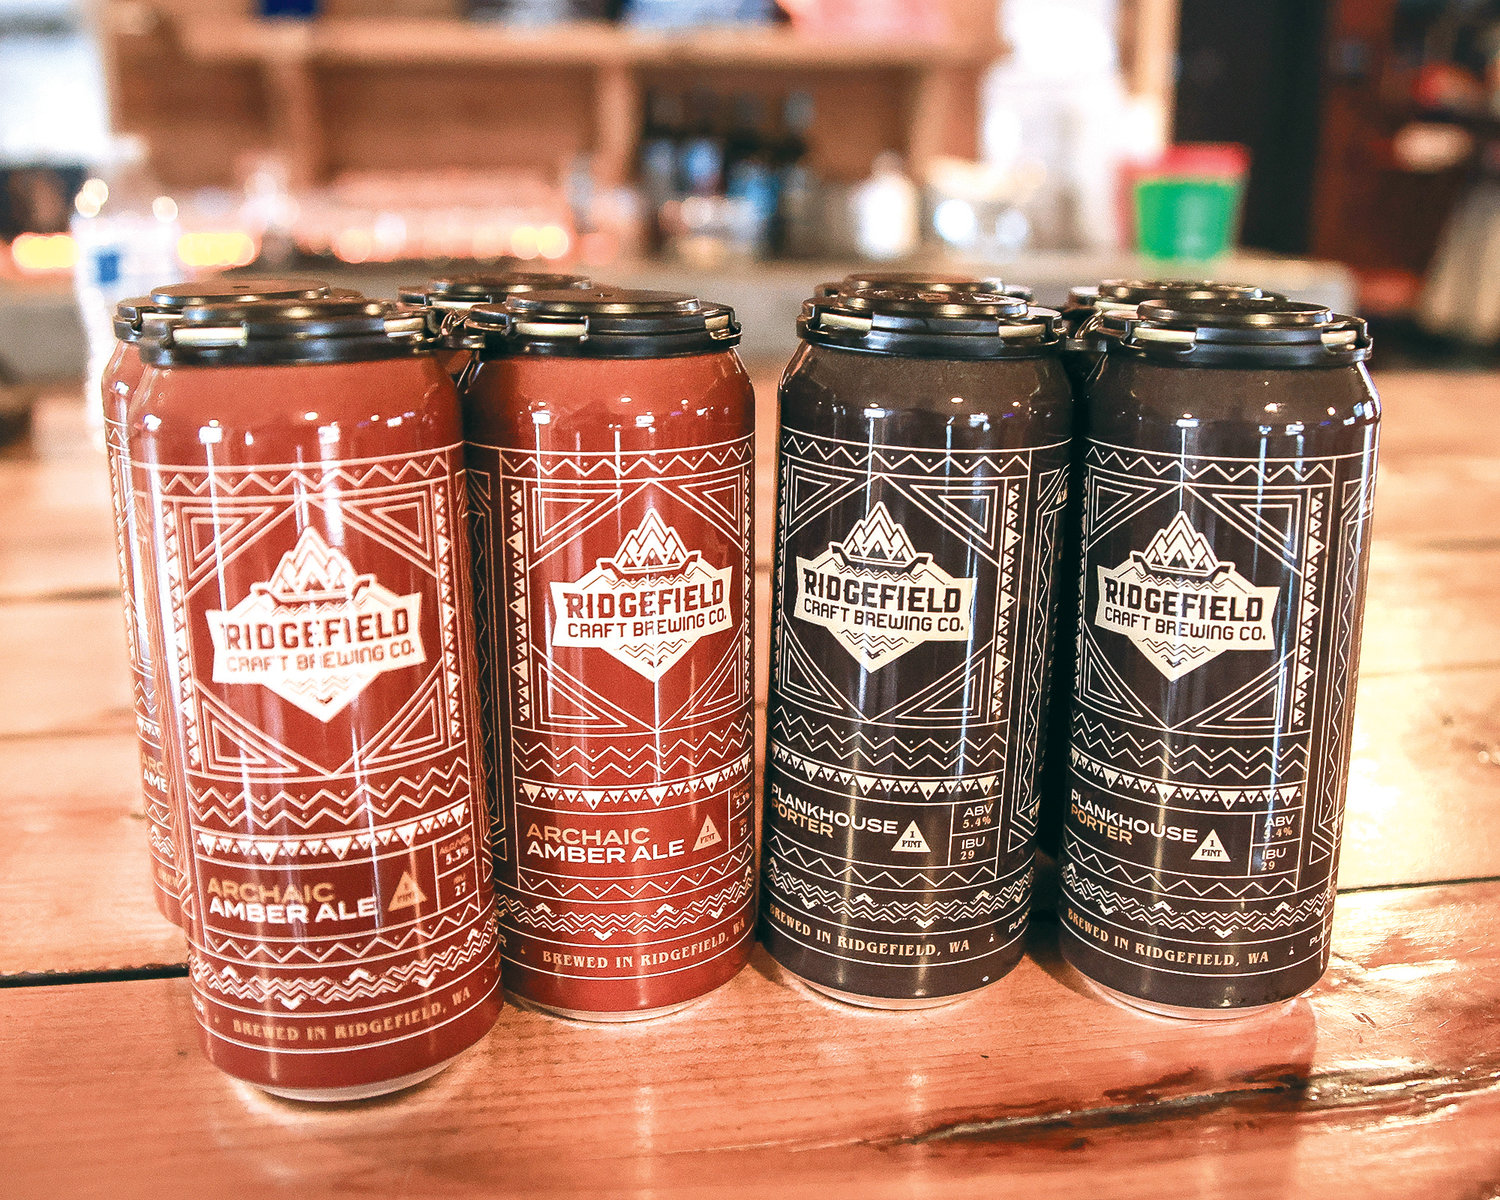 A pack of Ridgefield Craft Brewing's Plankhouse Porter and Archaic Amber Ale sits on a table on Wednesday, March 22. Ridgefield Craft Brewing Co. will be affected by Corwin Beverage's decision to back out of the alcoholic beverage distribution game.